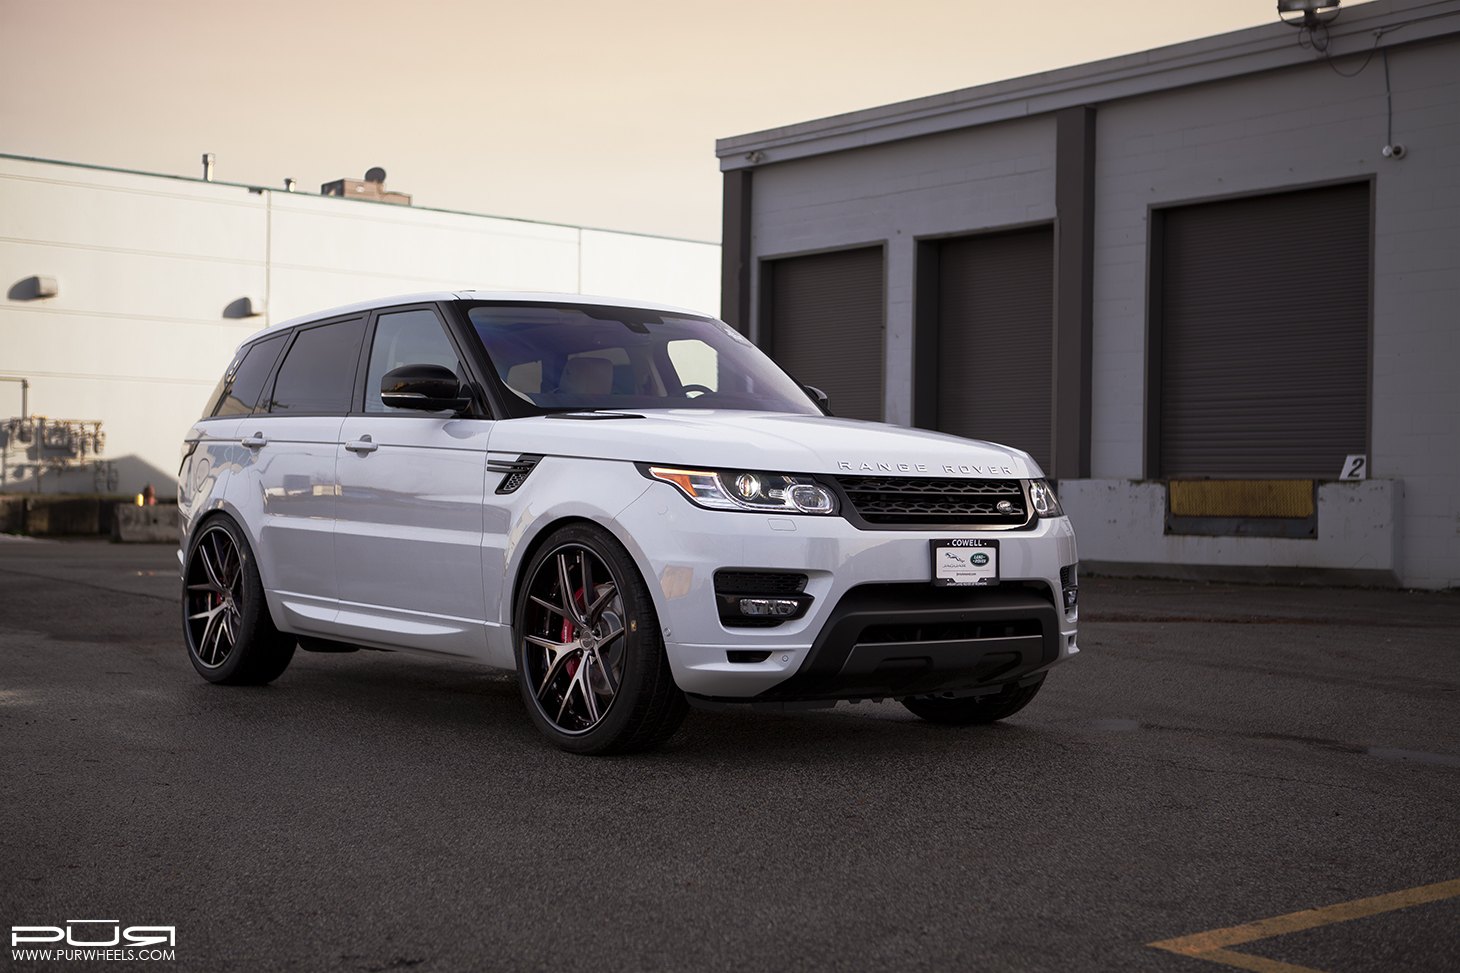 White Range Rover Sport with Aftermarket Bumper Guard - Photo by PUR Wheels